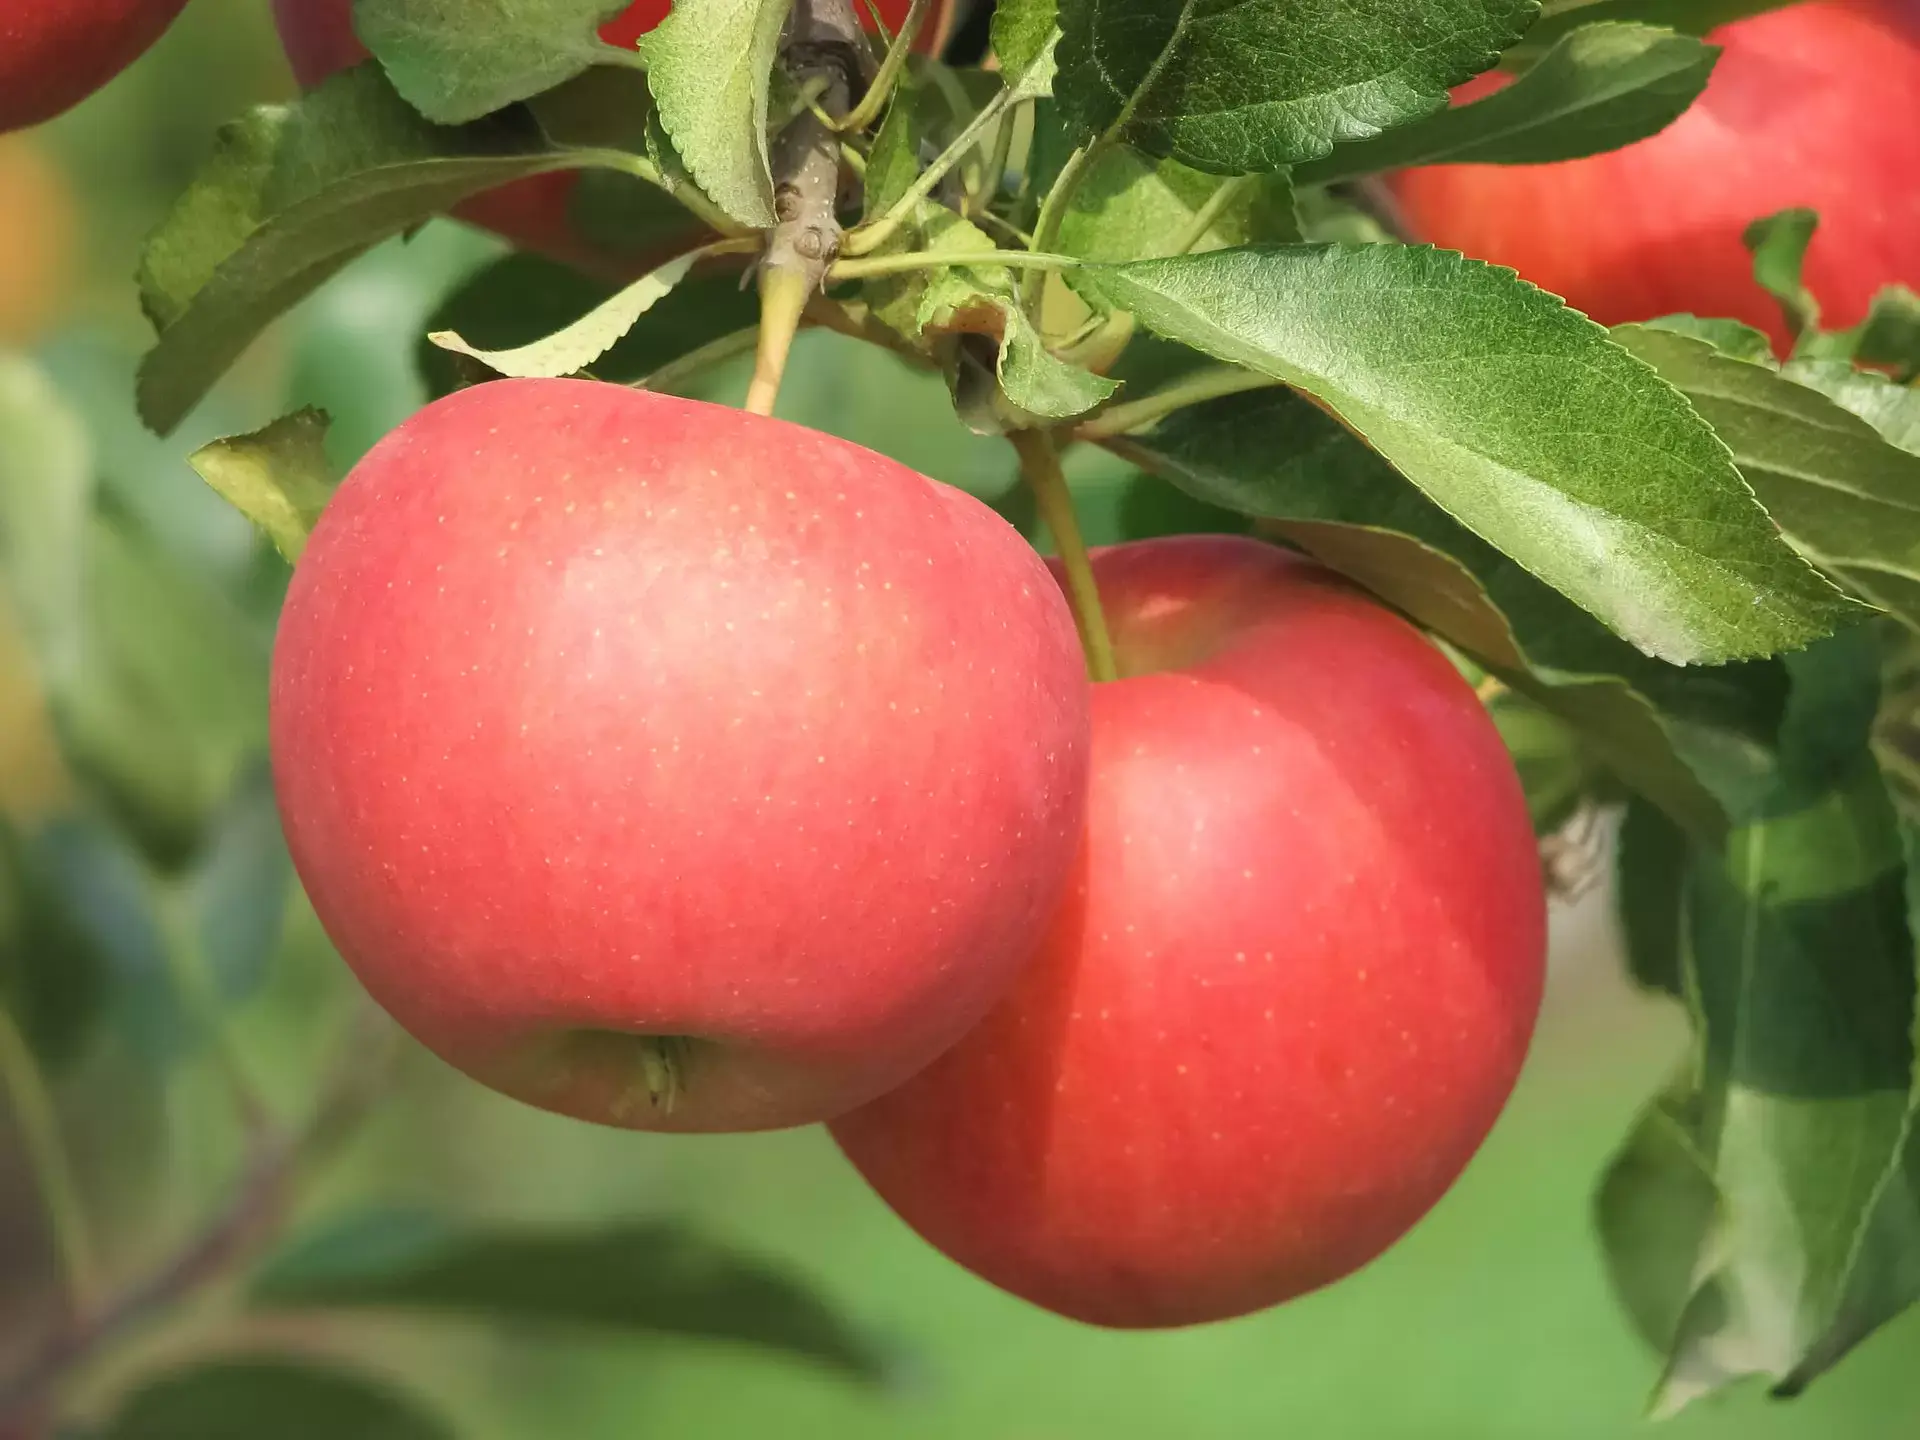 How to plant a fruit orchard and turn it into a successful business